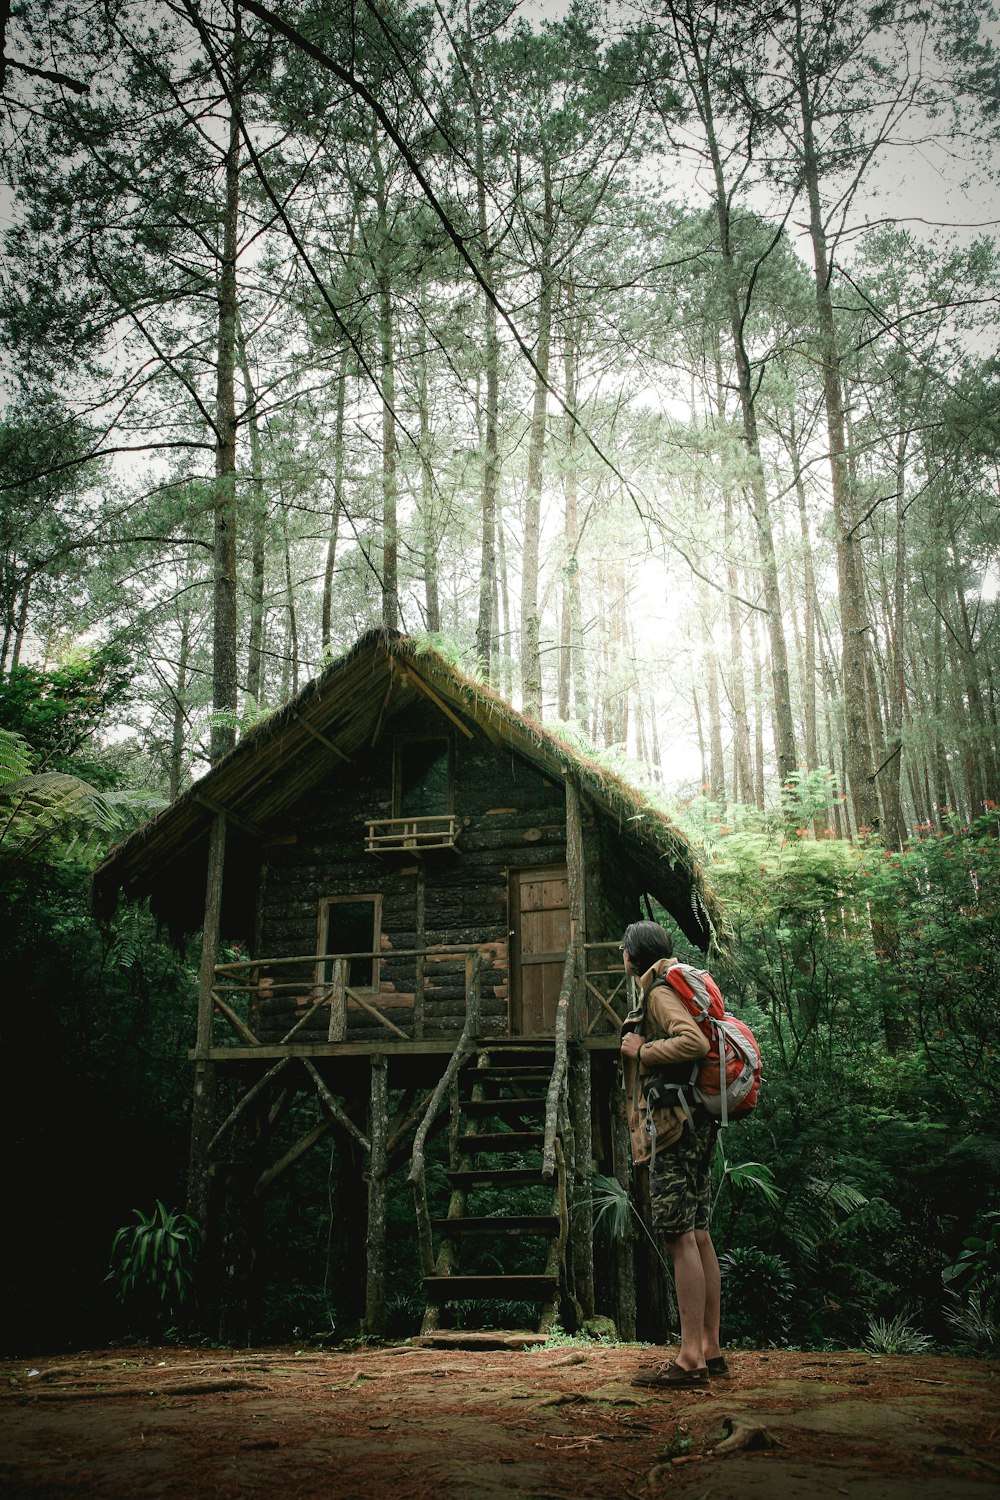 mountaineer standing in the middle of forest nearby hut